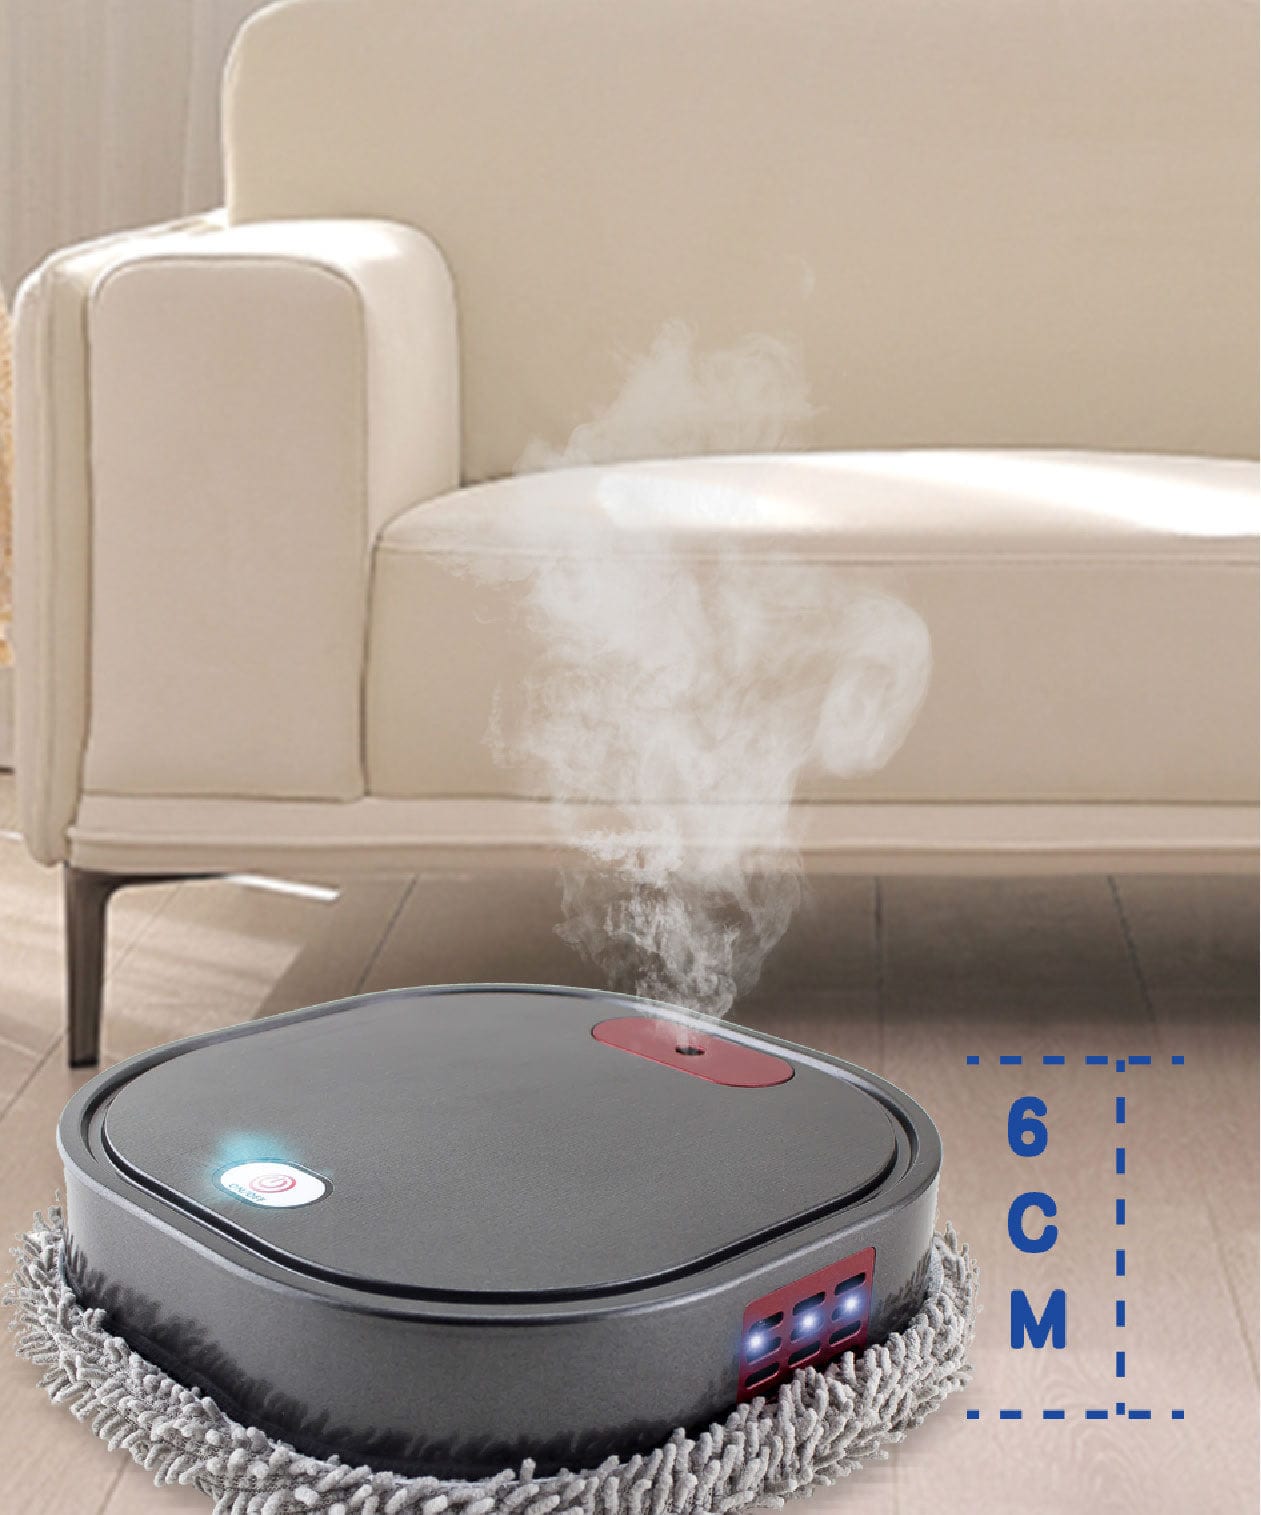 HomeBound Essentials MopBot- Household Mopping Robot Cleaner